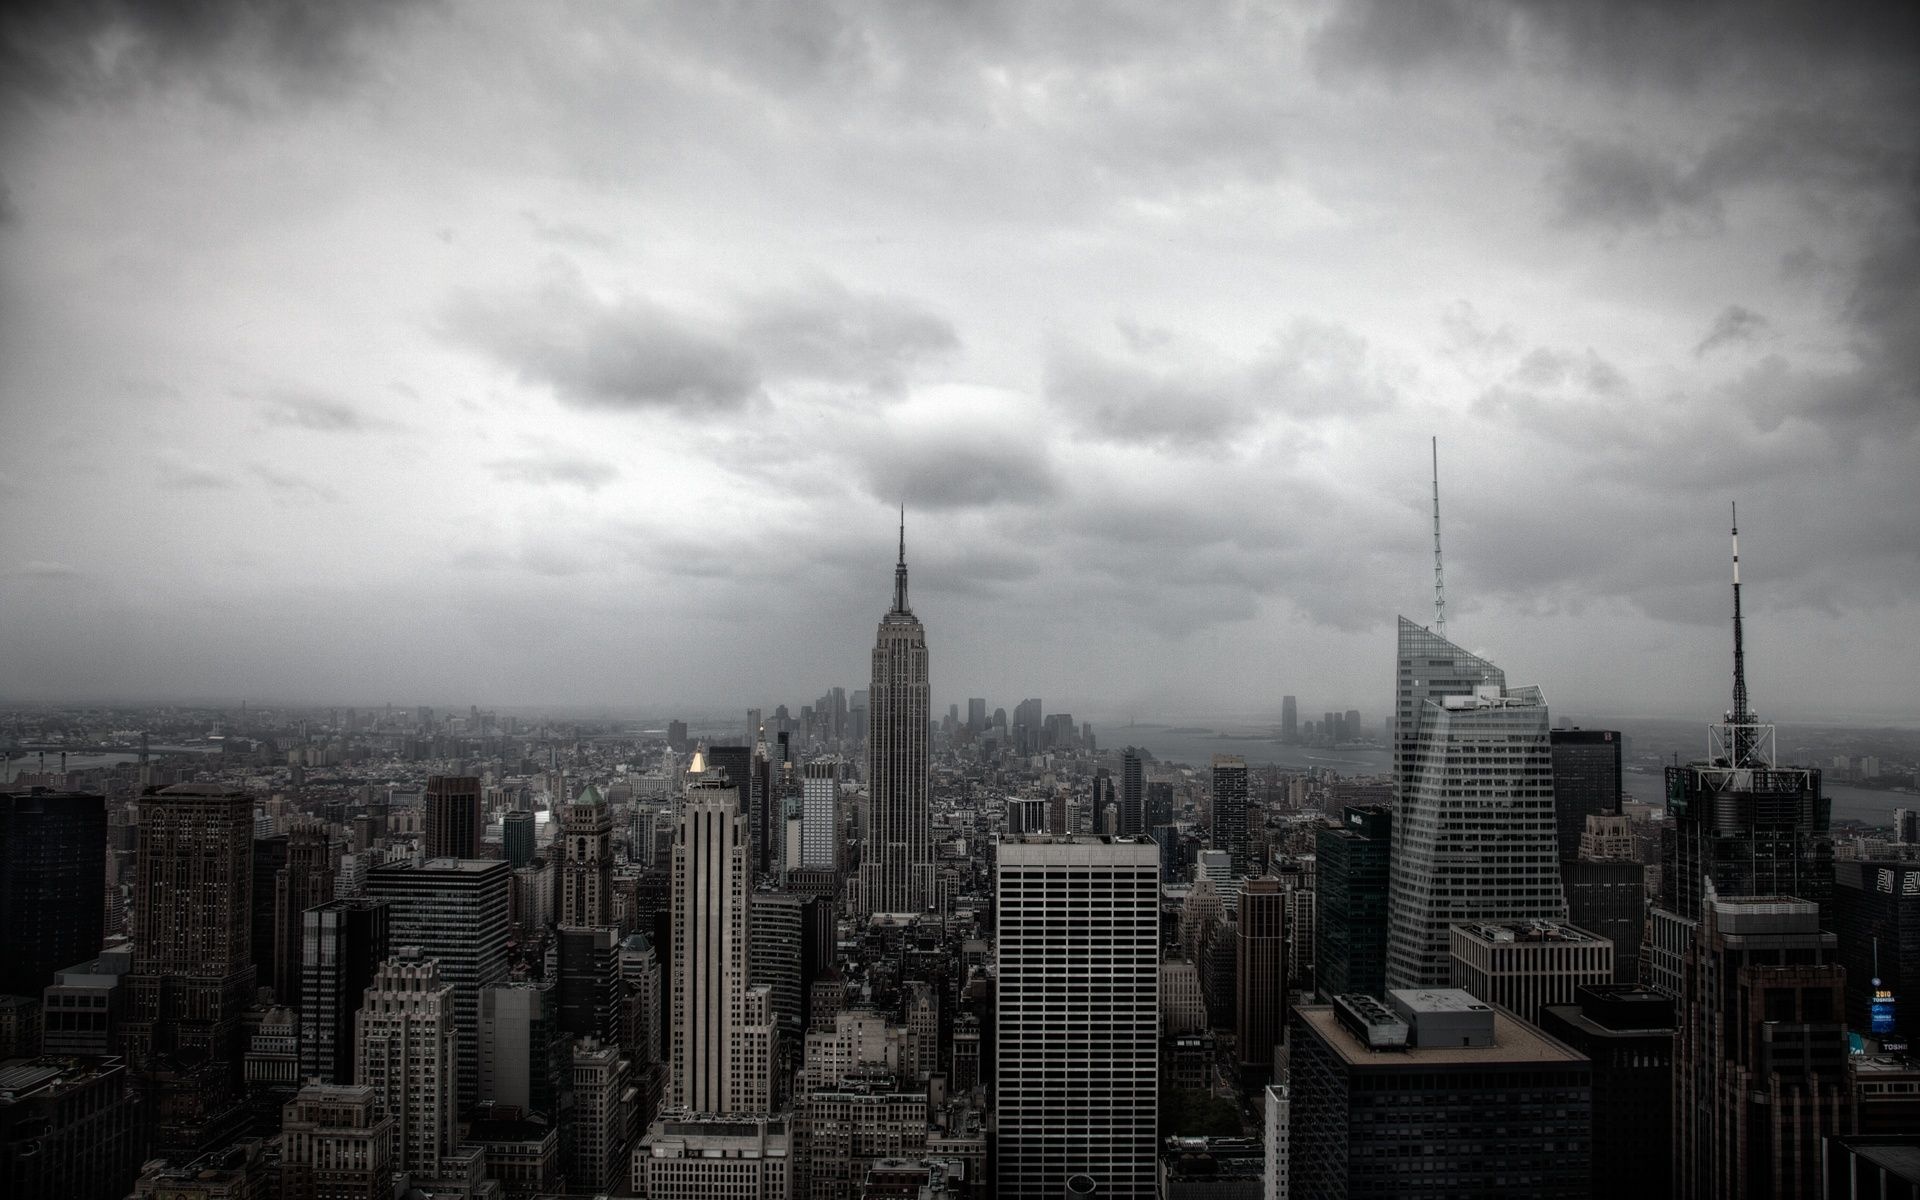 Gray Cloudy Sky: Monochrome, Urban landscape, City skyline, The thick and lowering clouds. 1920x1200 HD Background.